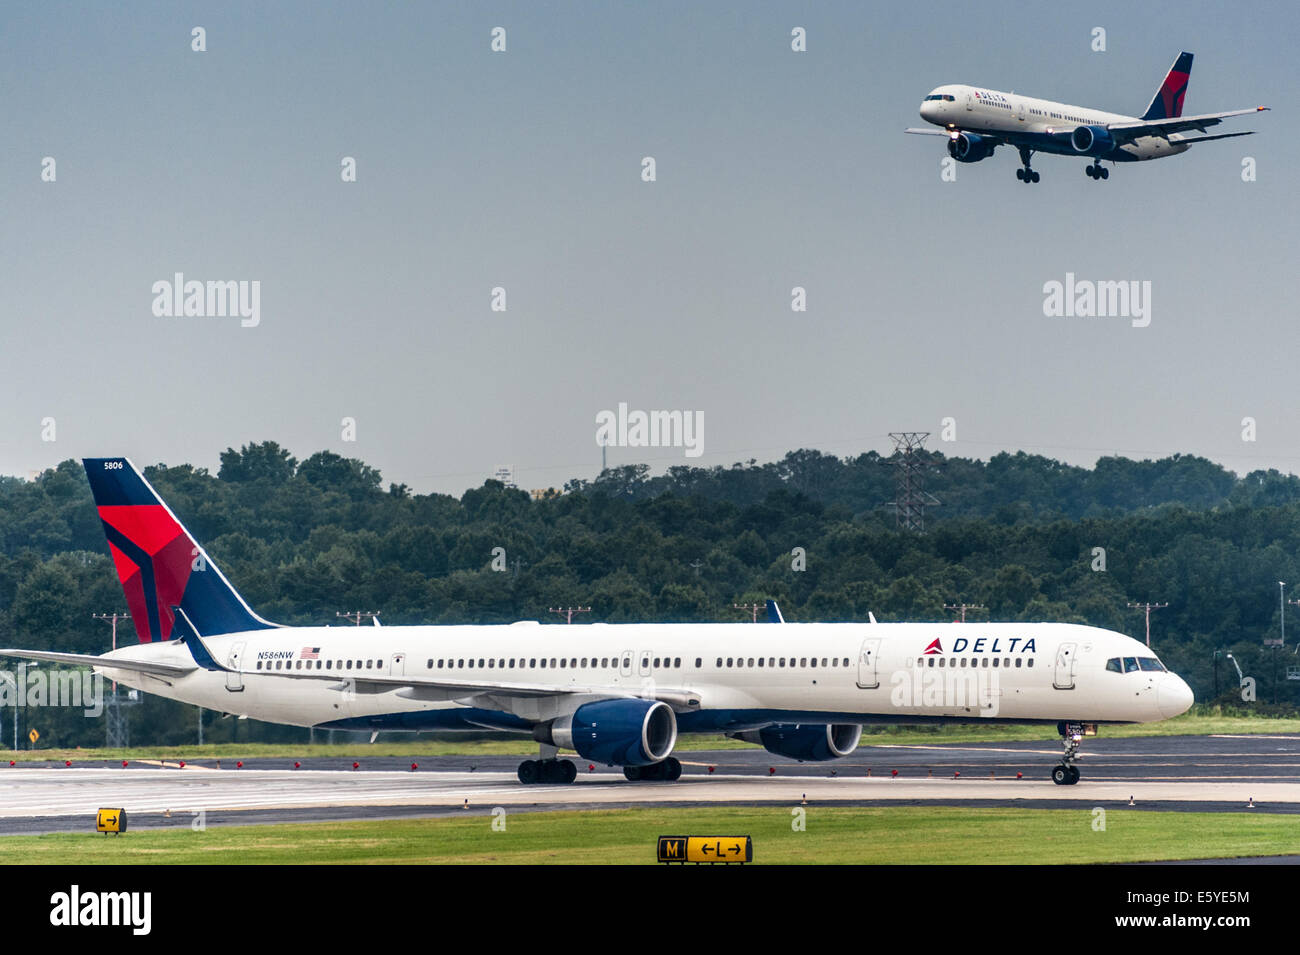 Delta Airlines jets arriving and departing at Hartsfield-Jackson Atlanta International Airport, the world's busiest airport. USA Stock Photo